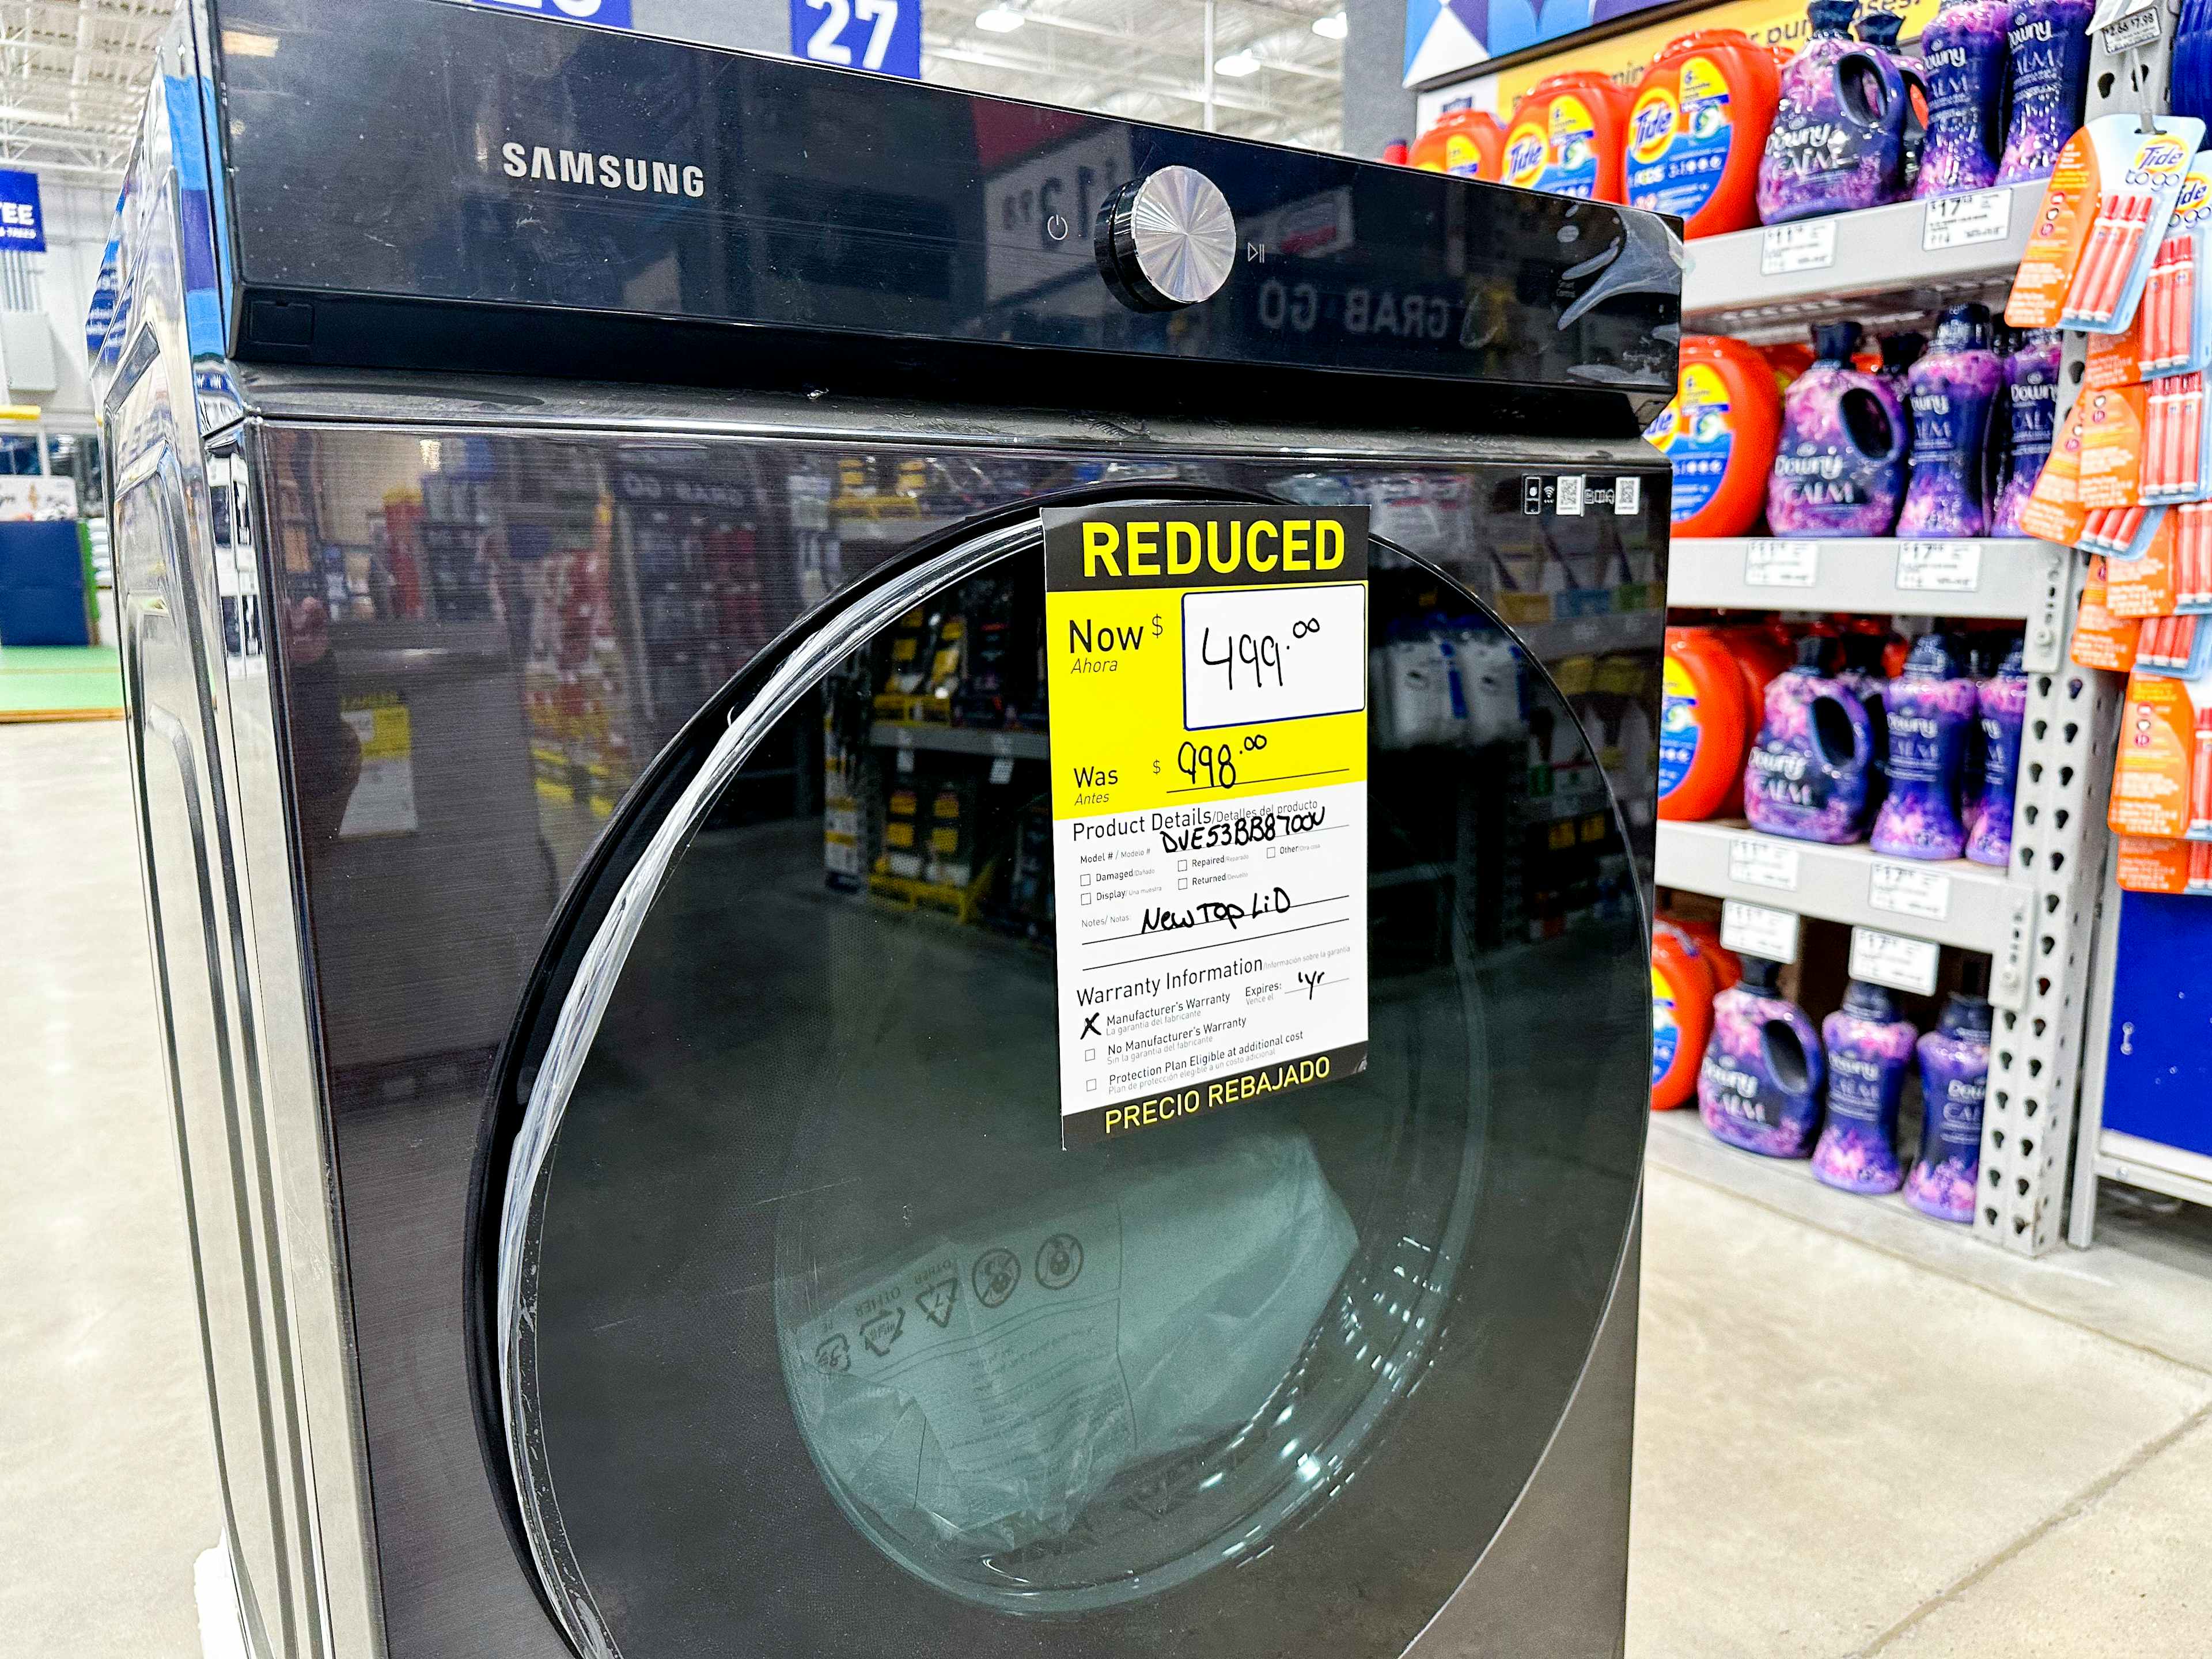 lowes-scratch-and-dent-appliances-samsung-washer-2